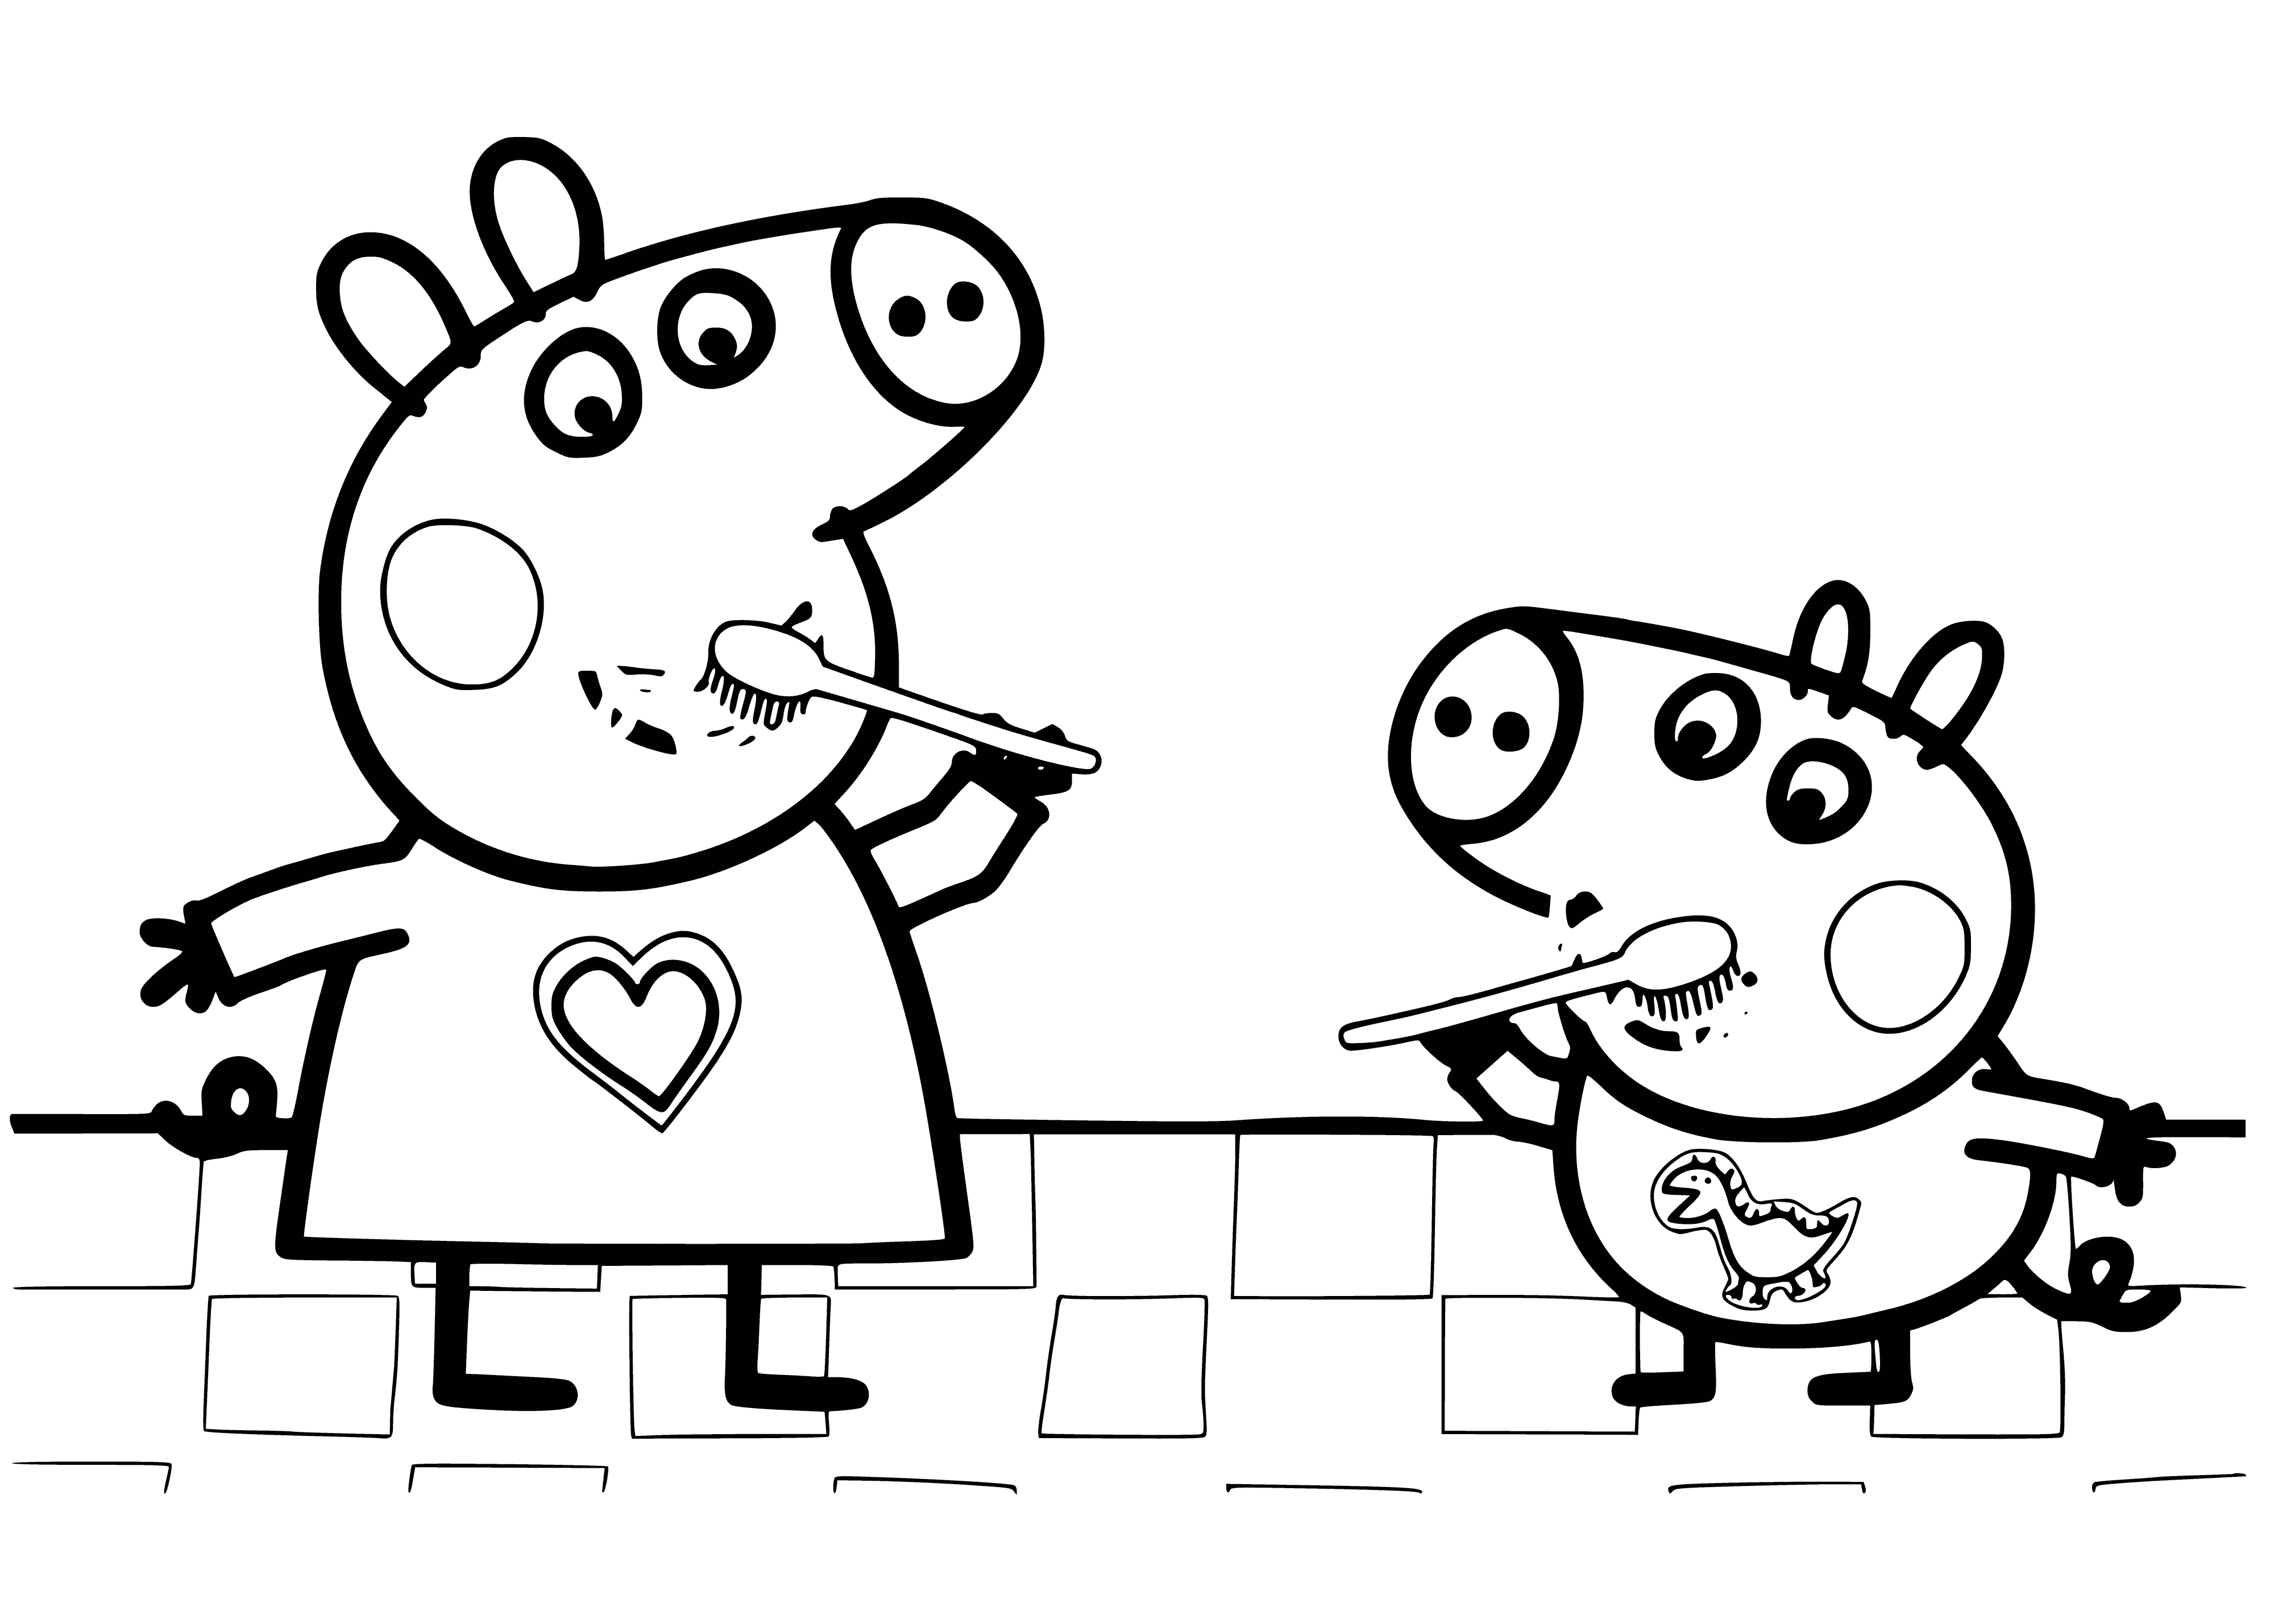 coloring page: Peppa & George brush their teeth in coloring page: Peppa on stool & George next to her, both with toothbrushes & toothpaste tube. #dentalhealth